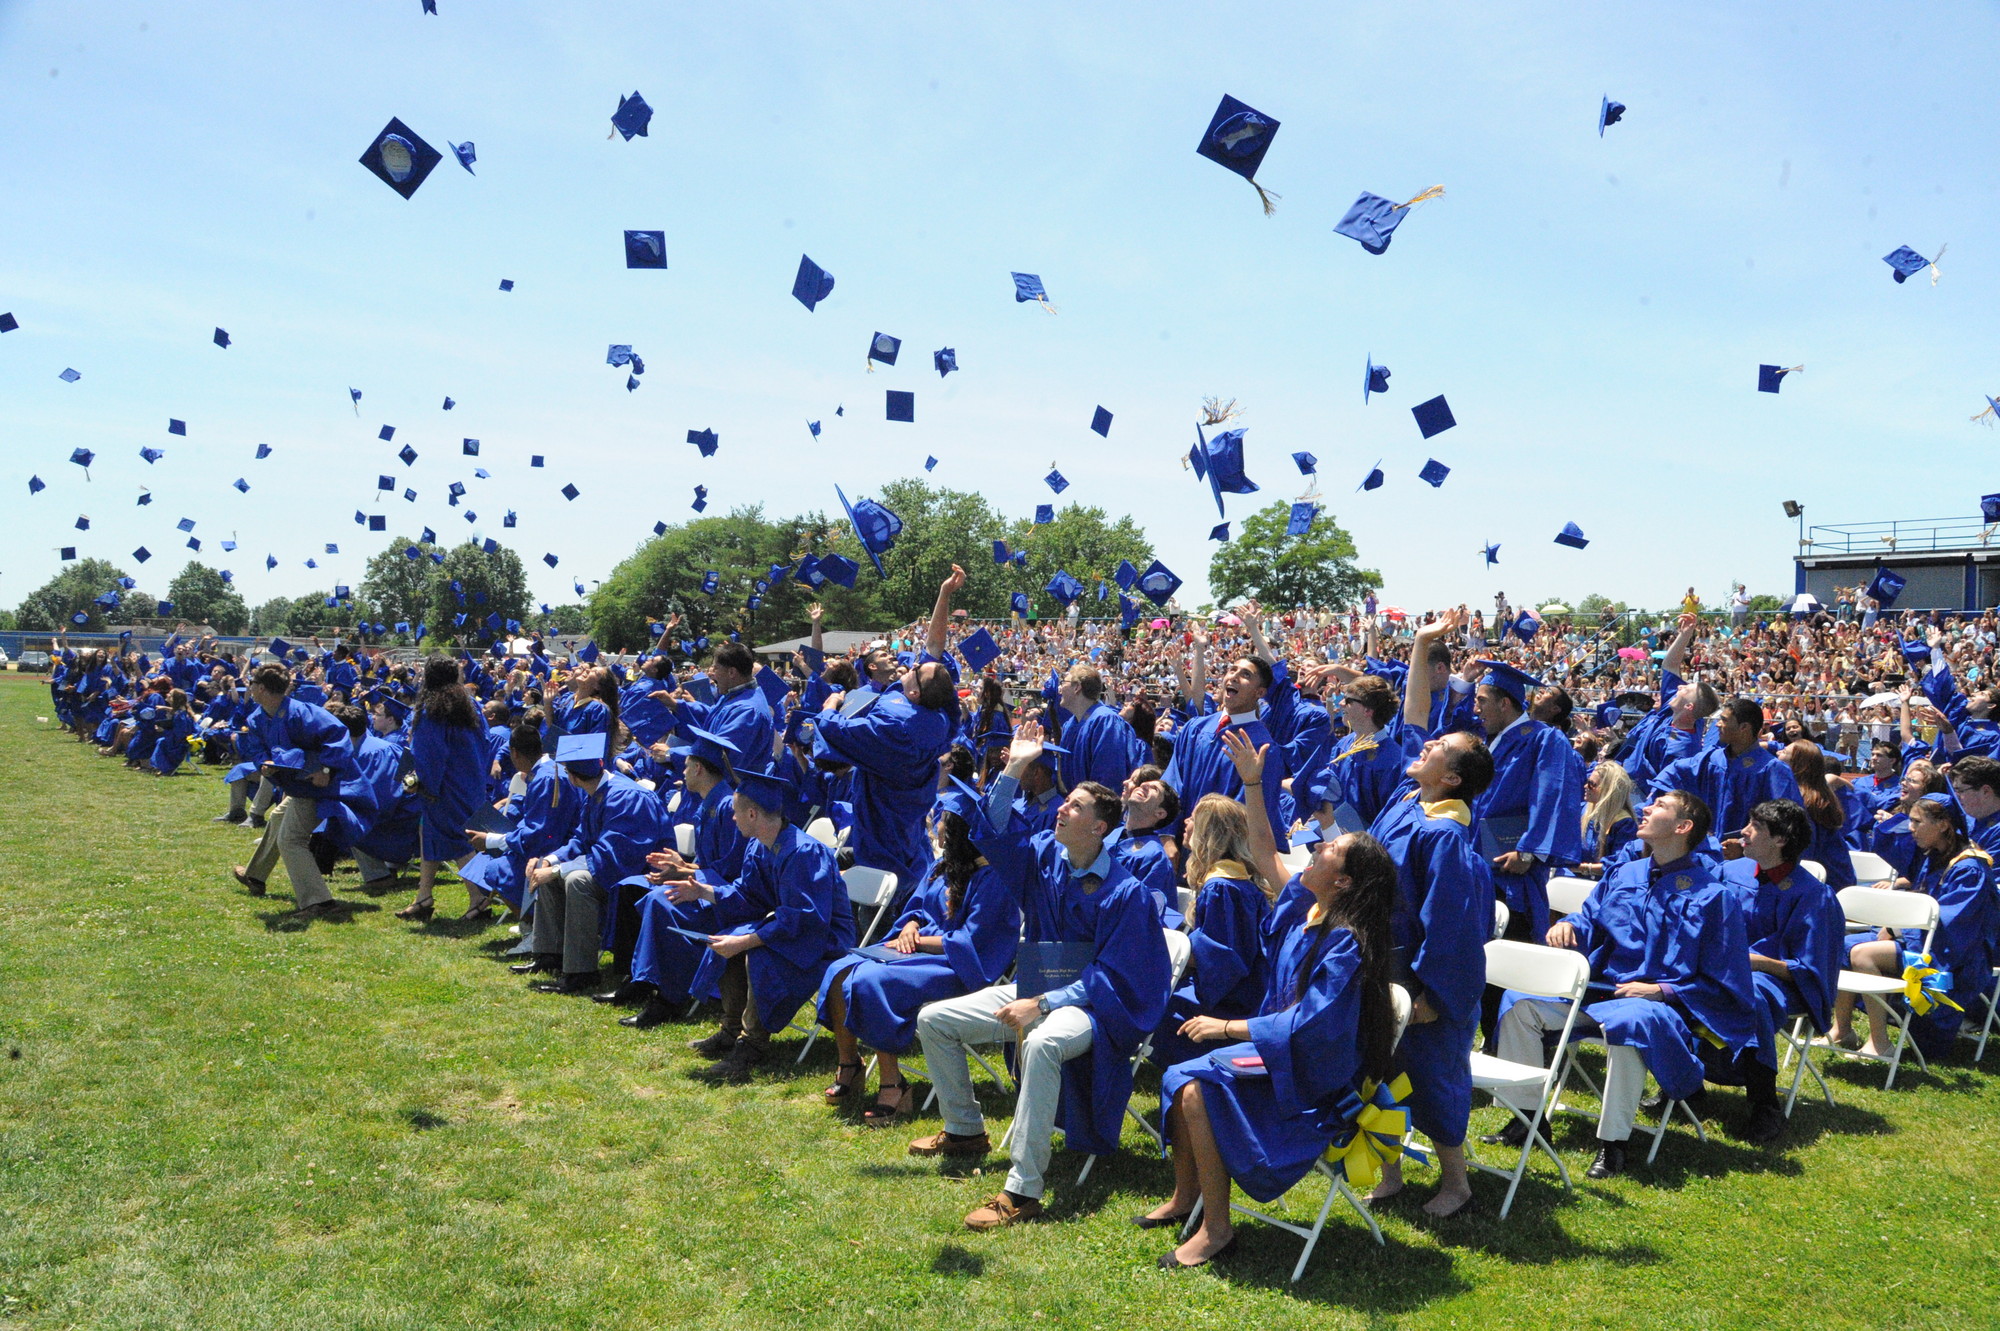 The East Meadow graduates celebrated at the end of Sunday's graduation ceremony